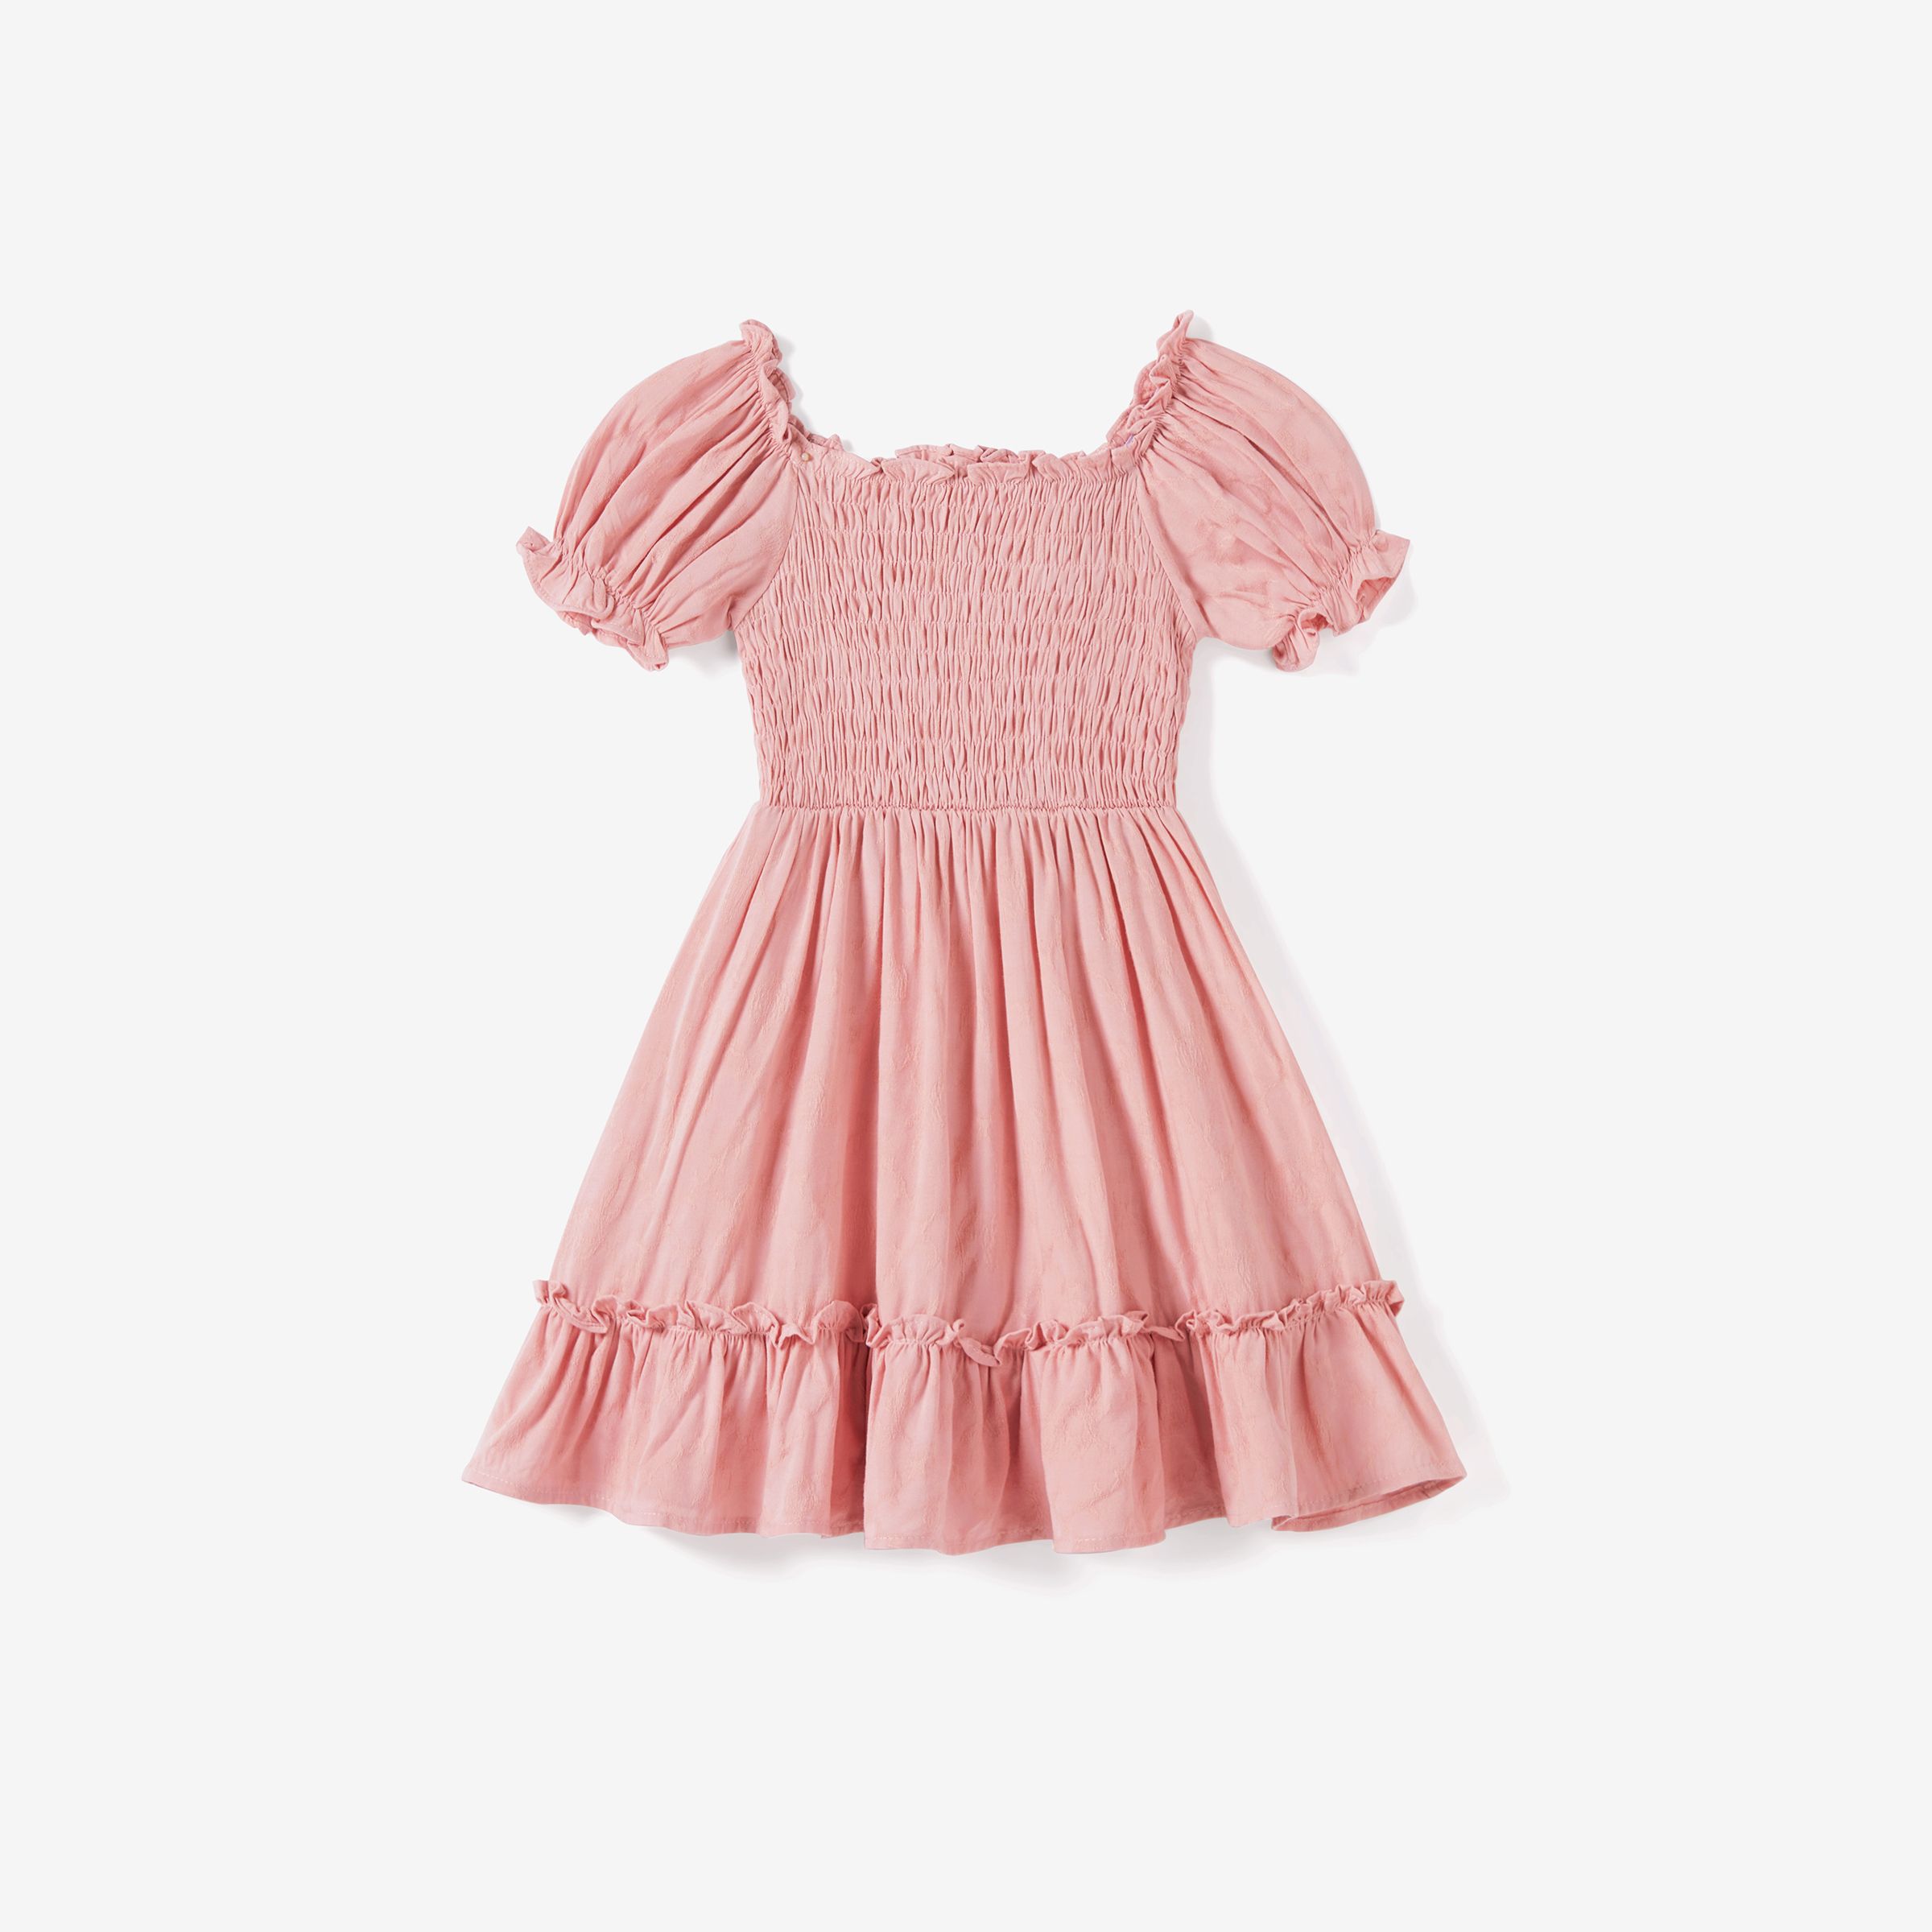 Family Matching Color Block Polo Shirt and Pink Shirred Top Bubble Sleeves Dress Sets